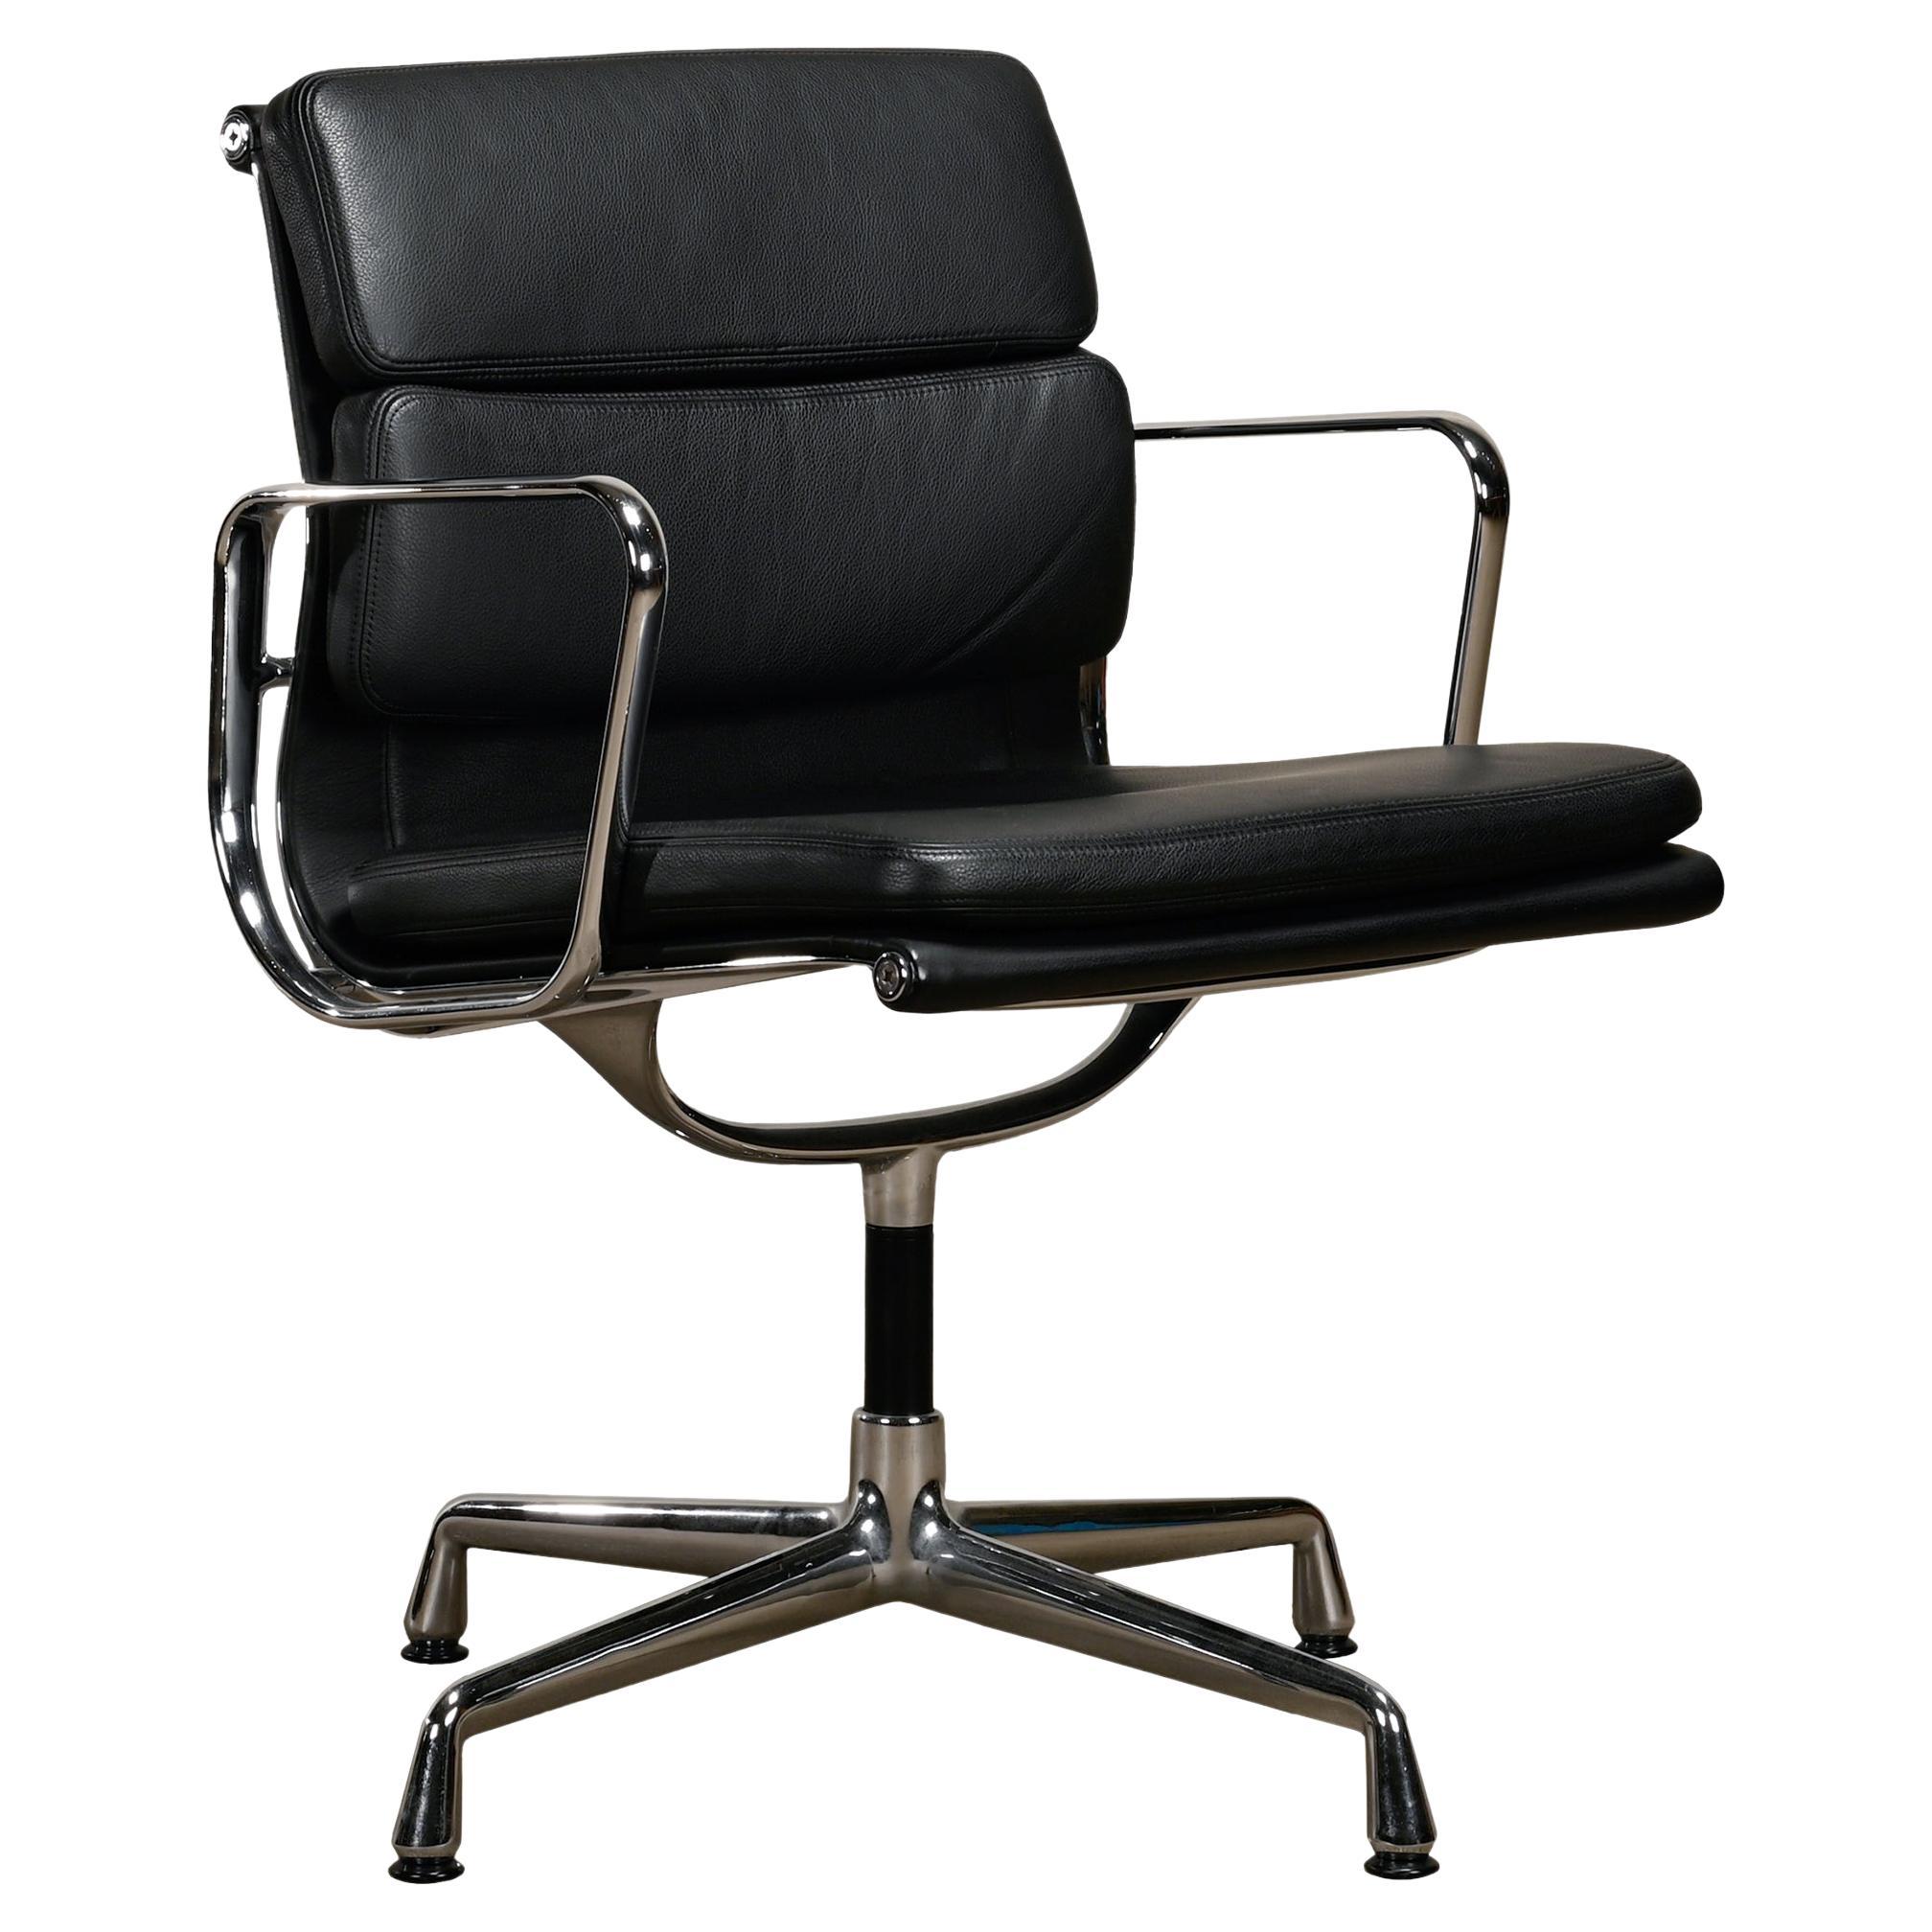 Charles & Ray Eames EA208 Dining or Conference Chair in Black leather, Vitra For Sale